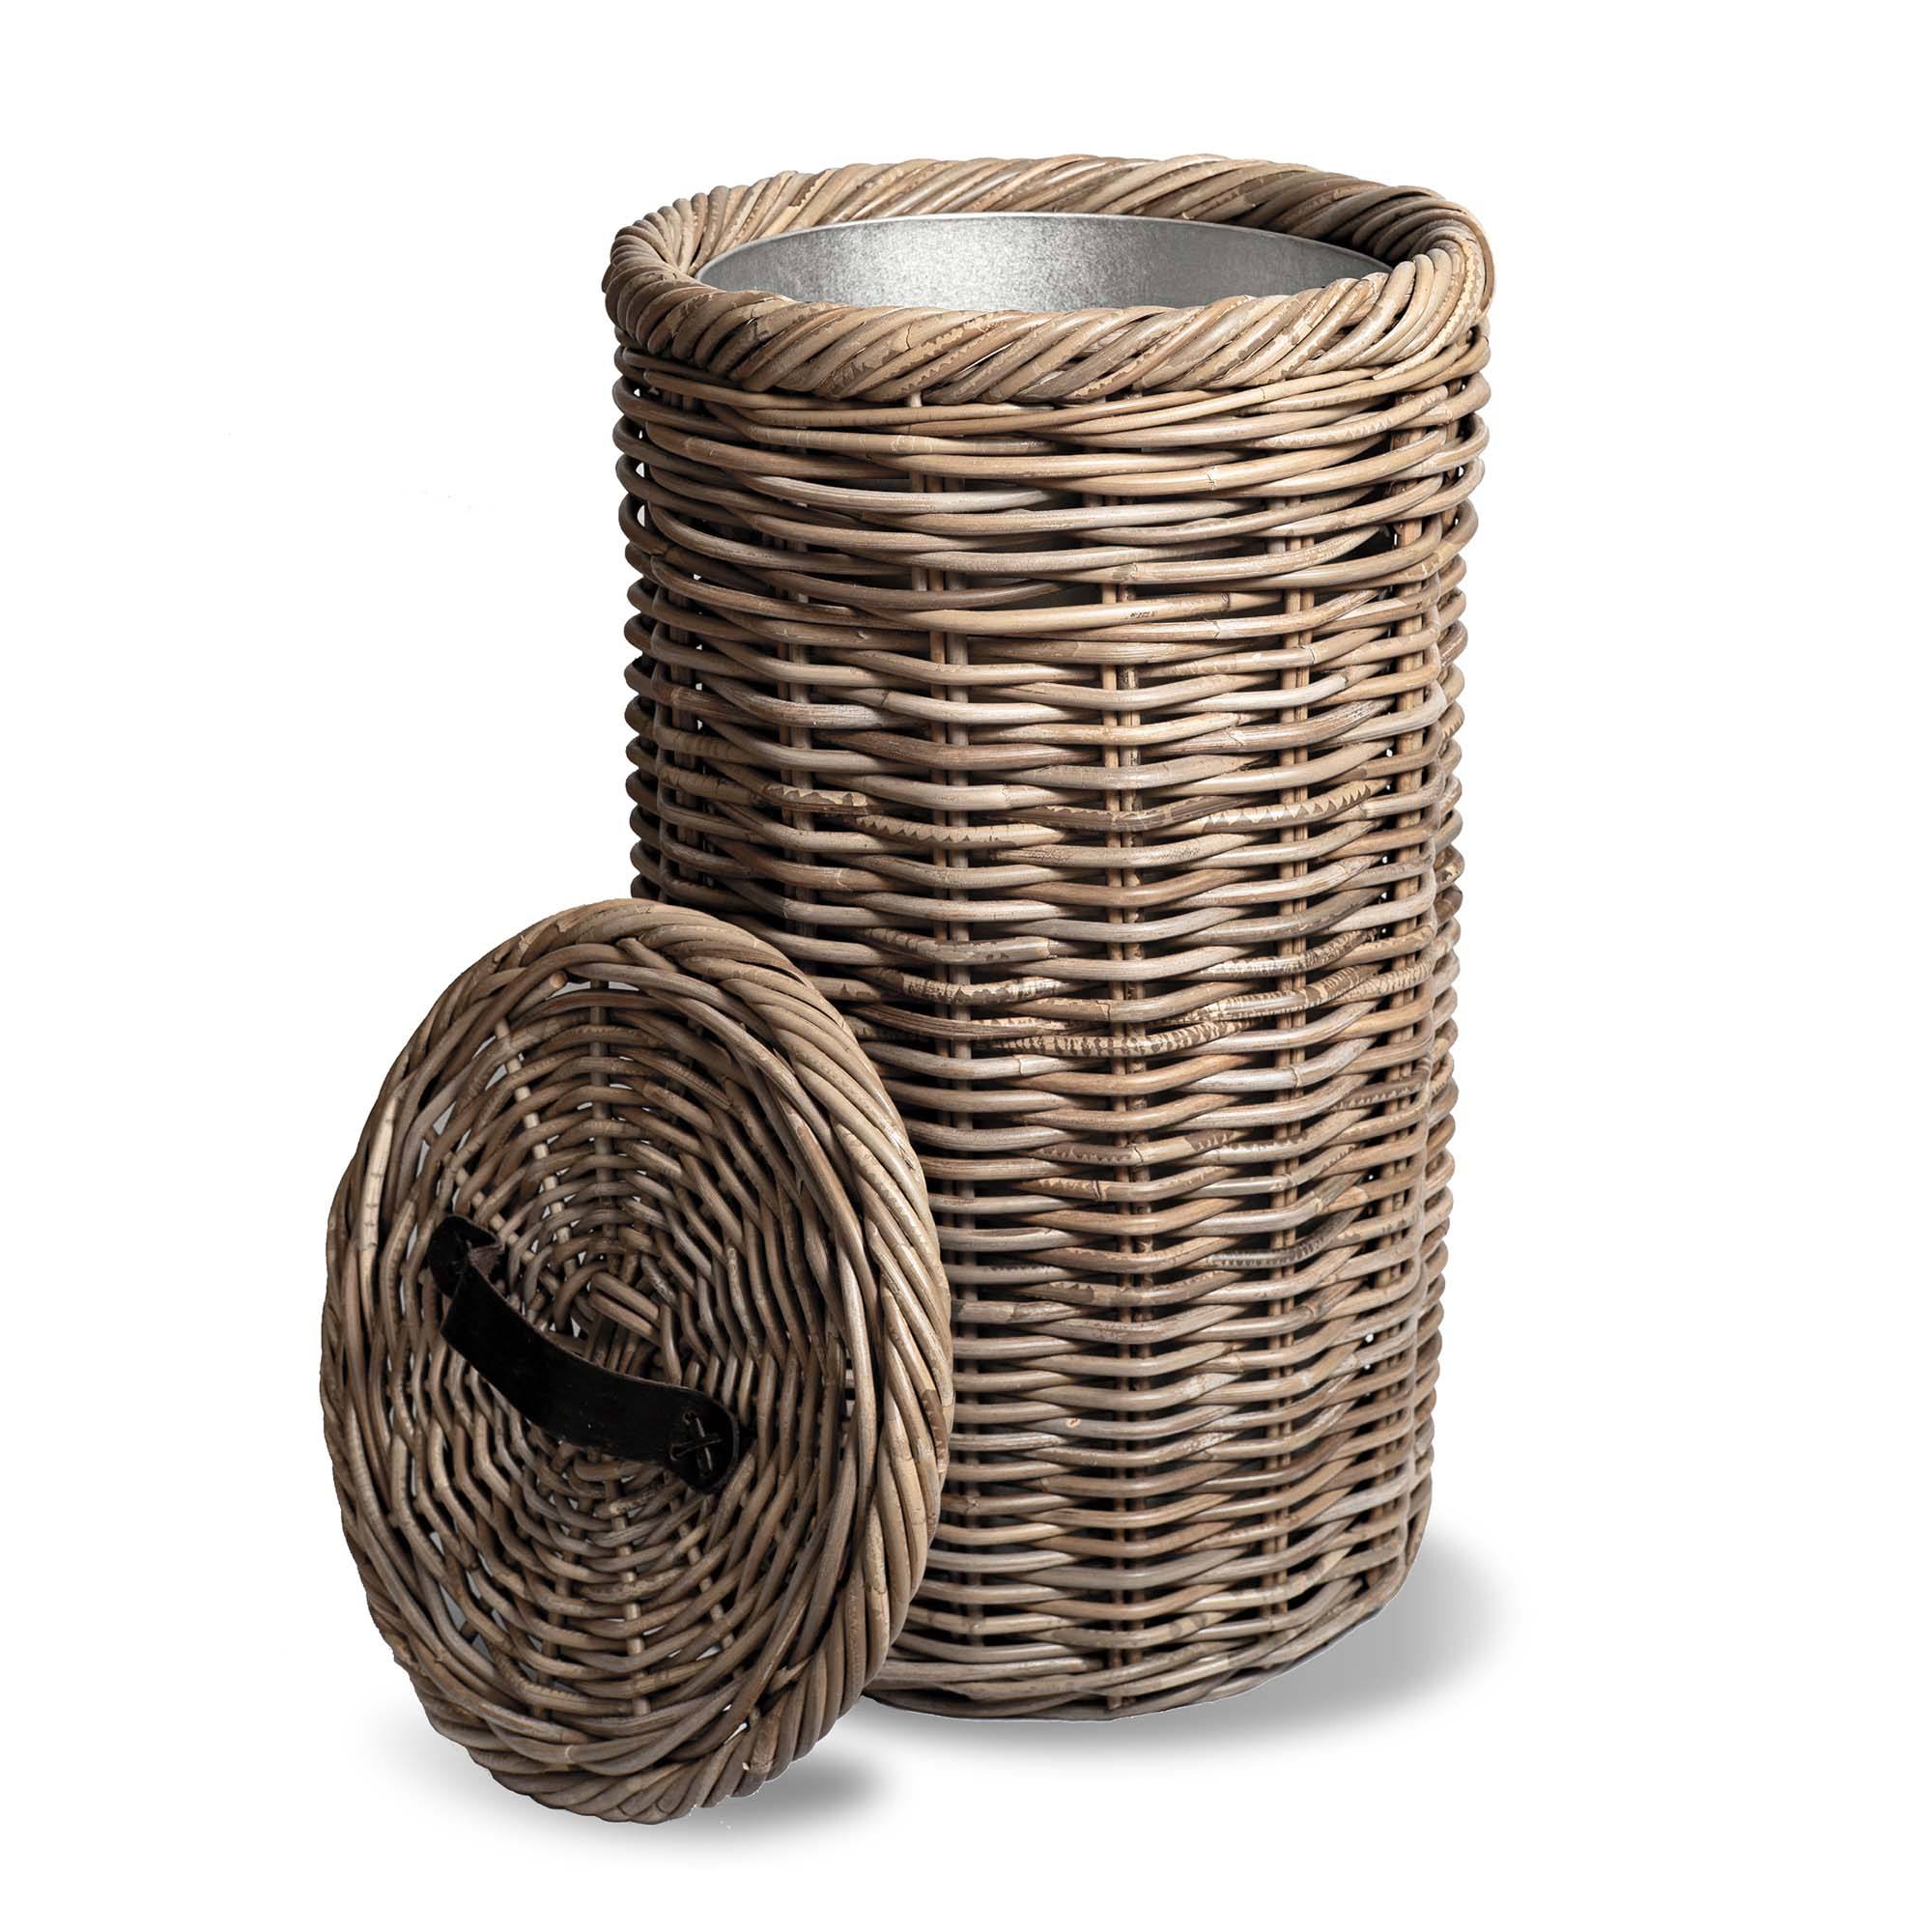 The Basket Lady Large Wicker Waste Basket with Metal Liner, One size, Antique Walnut Brown